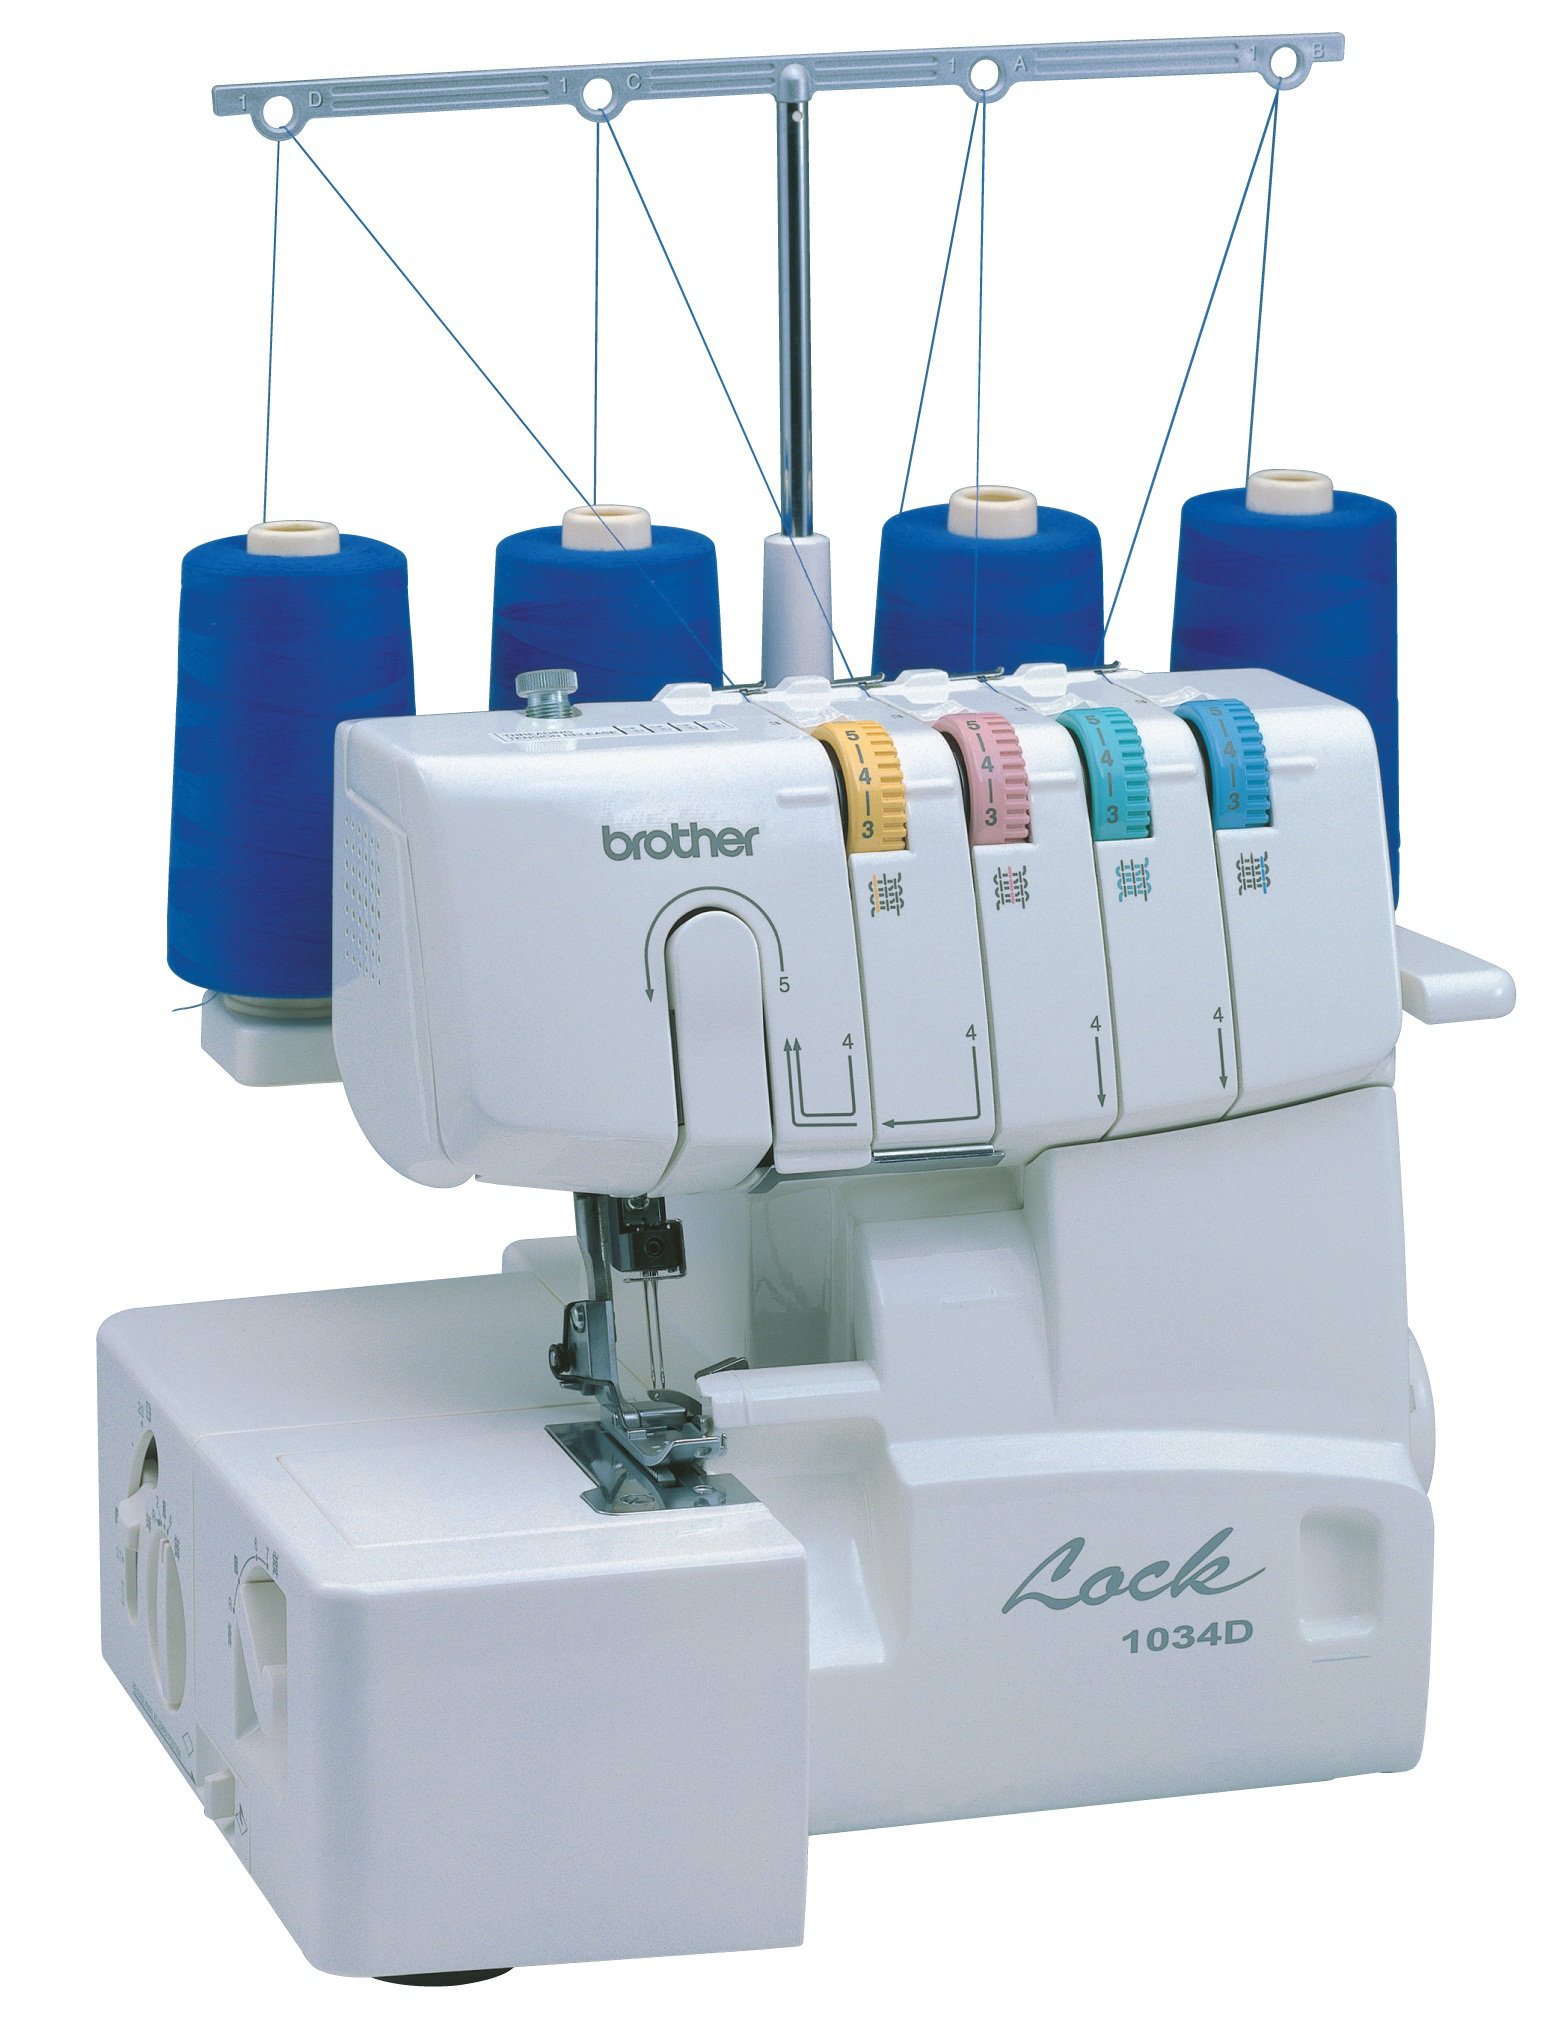 Singer 5050 Sewing Machine/Embroidery/Serger Owners Manual Reprint FREE SHIPPING 